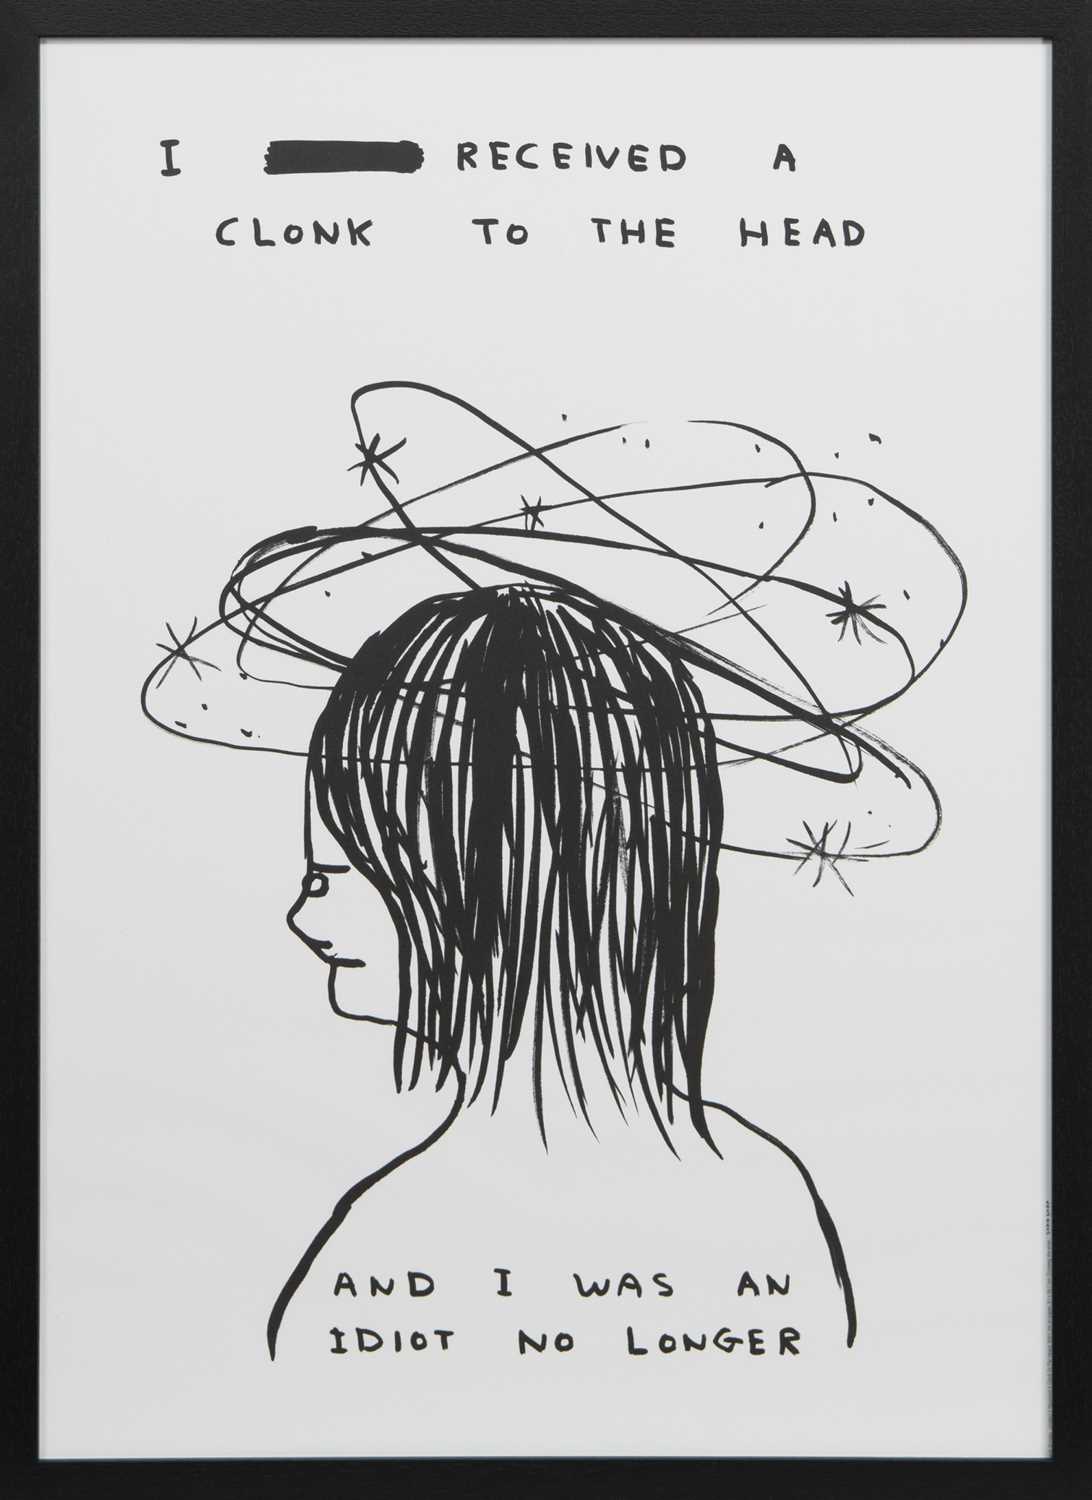 I'VE RECEIVED A CLONK TO THE HEAD, A LITHOGRAPH BY DAVID SHRIGLEY